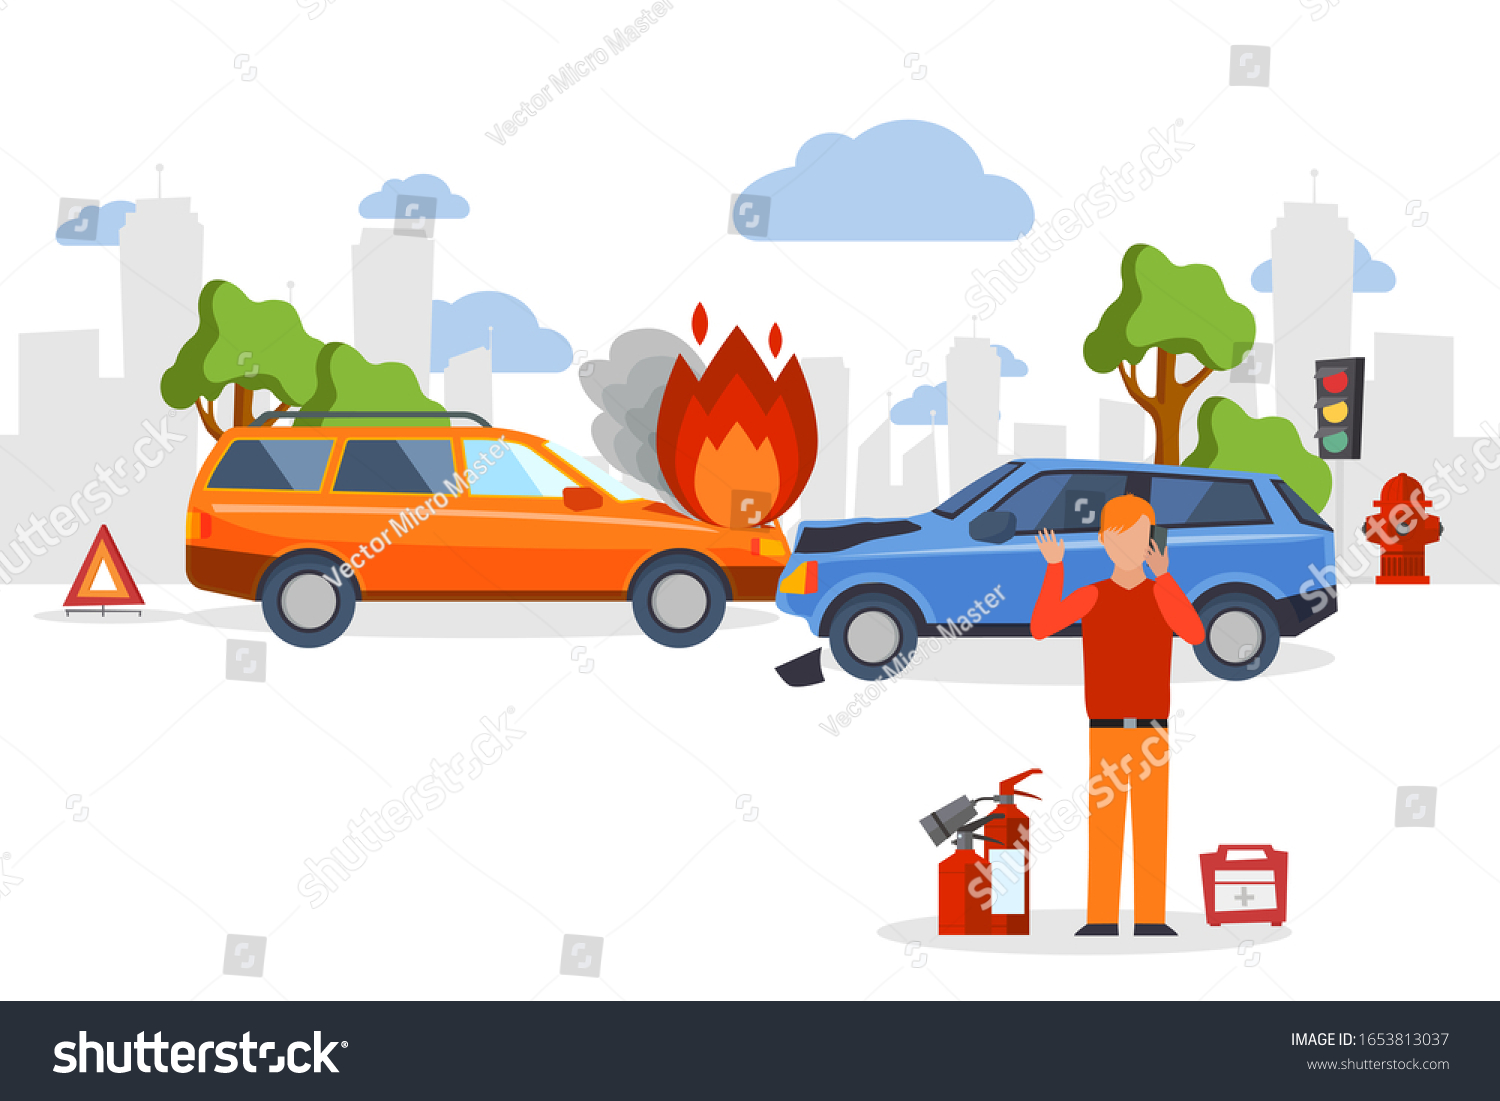 Car accident insurance, road crash in flat cartoon style, man calling for emergency help, vector illustration. Road accident, car collision insurance, people in emergency traffic situation call help